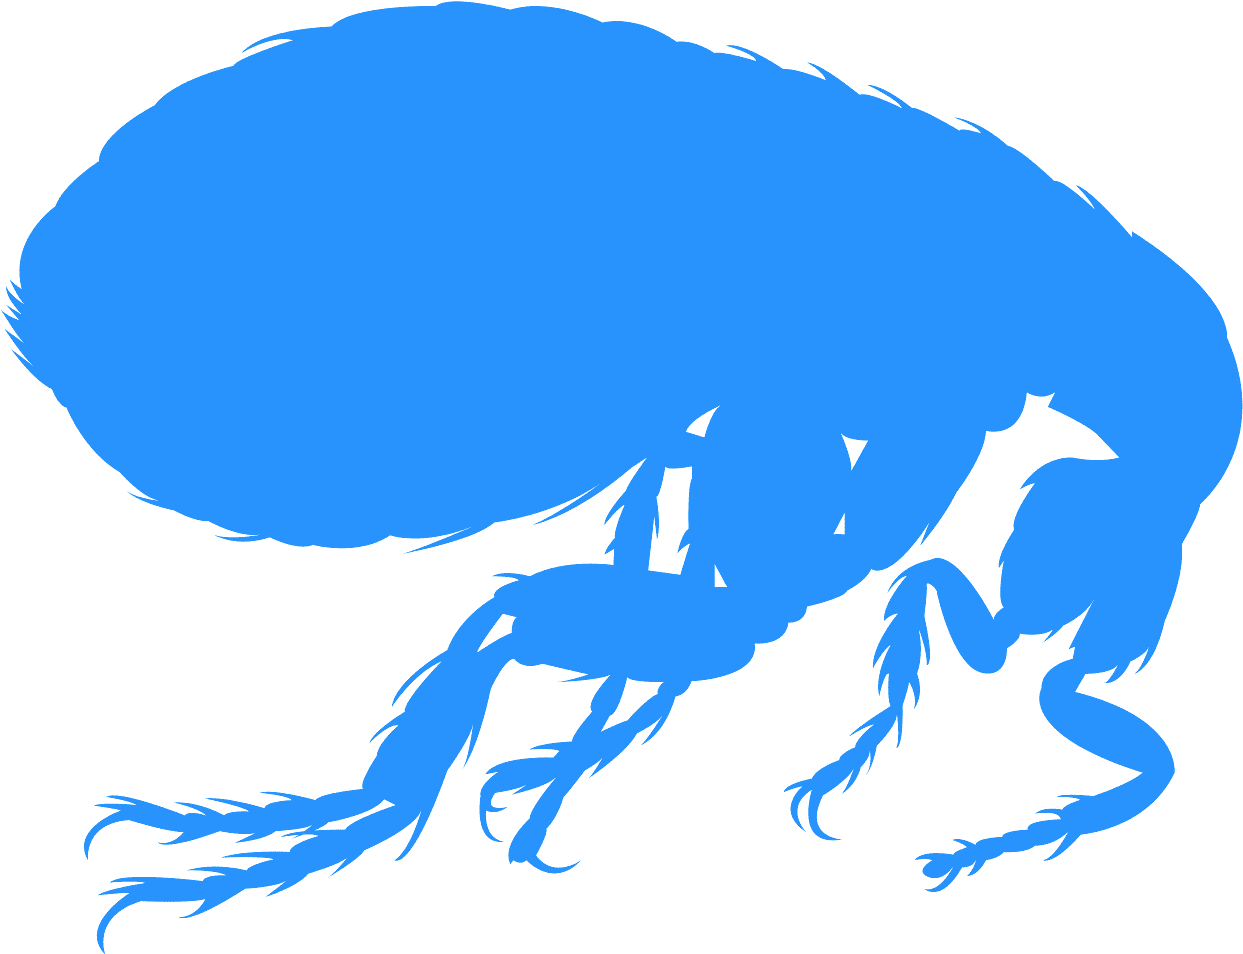 A Blue Bug Silhouette On A Black Background